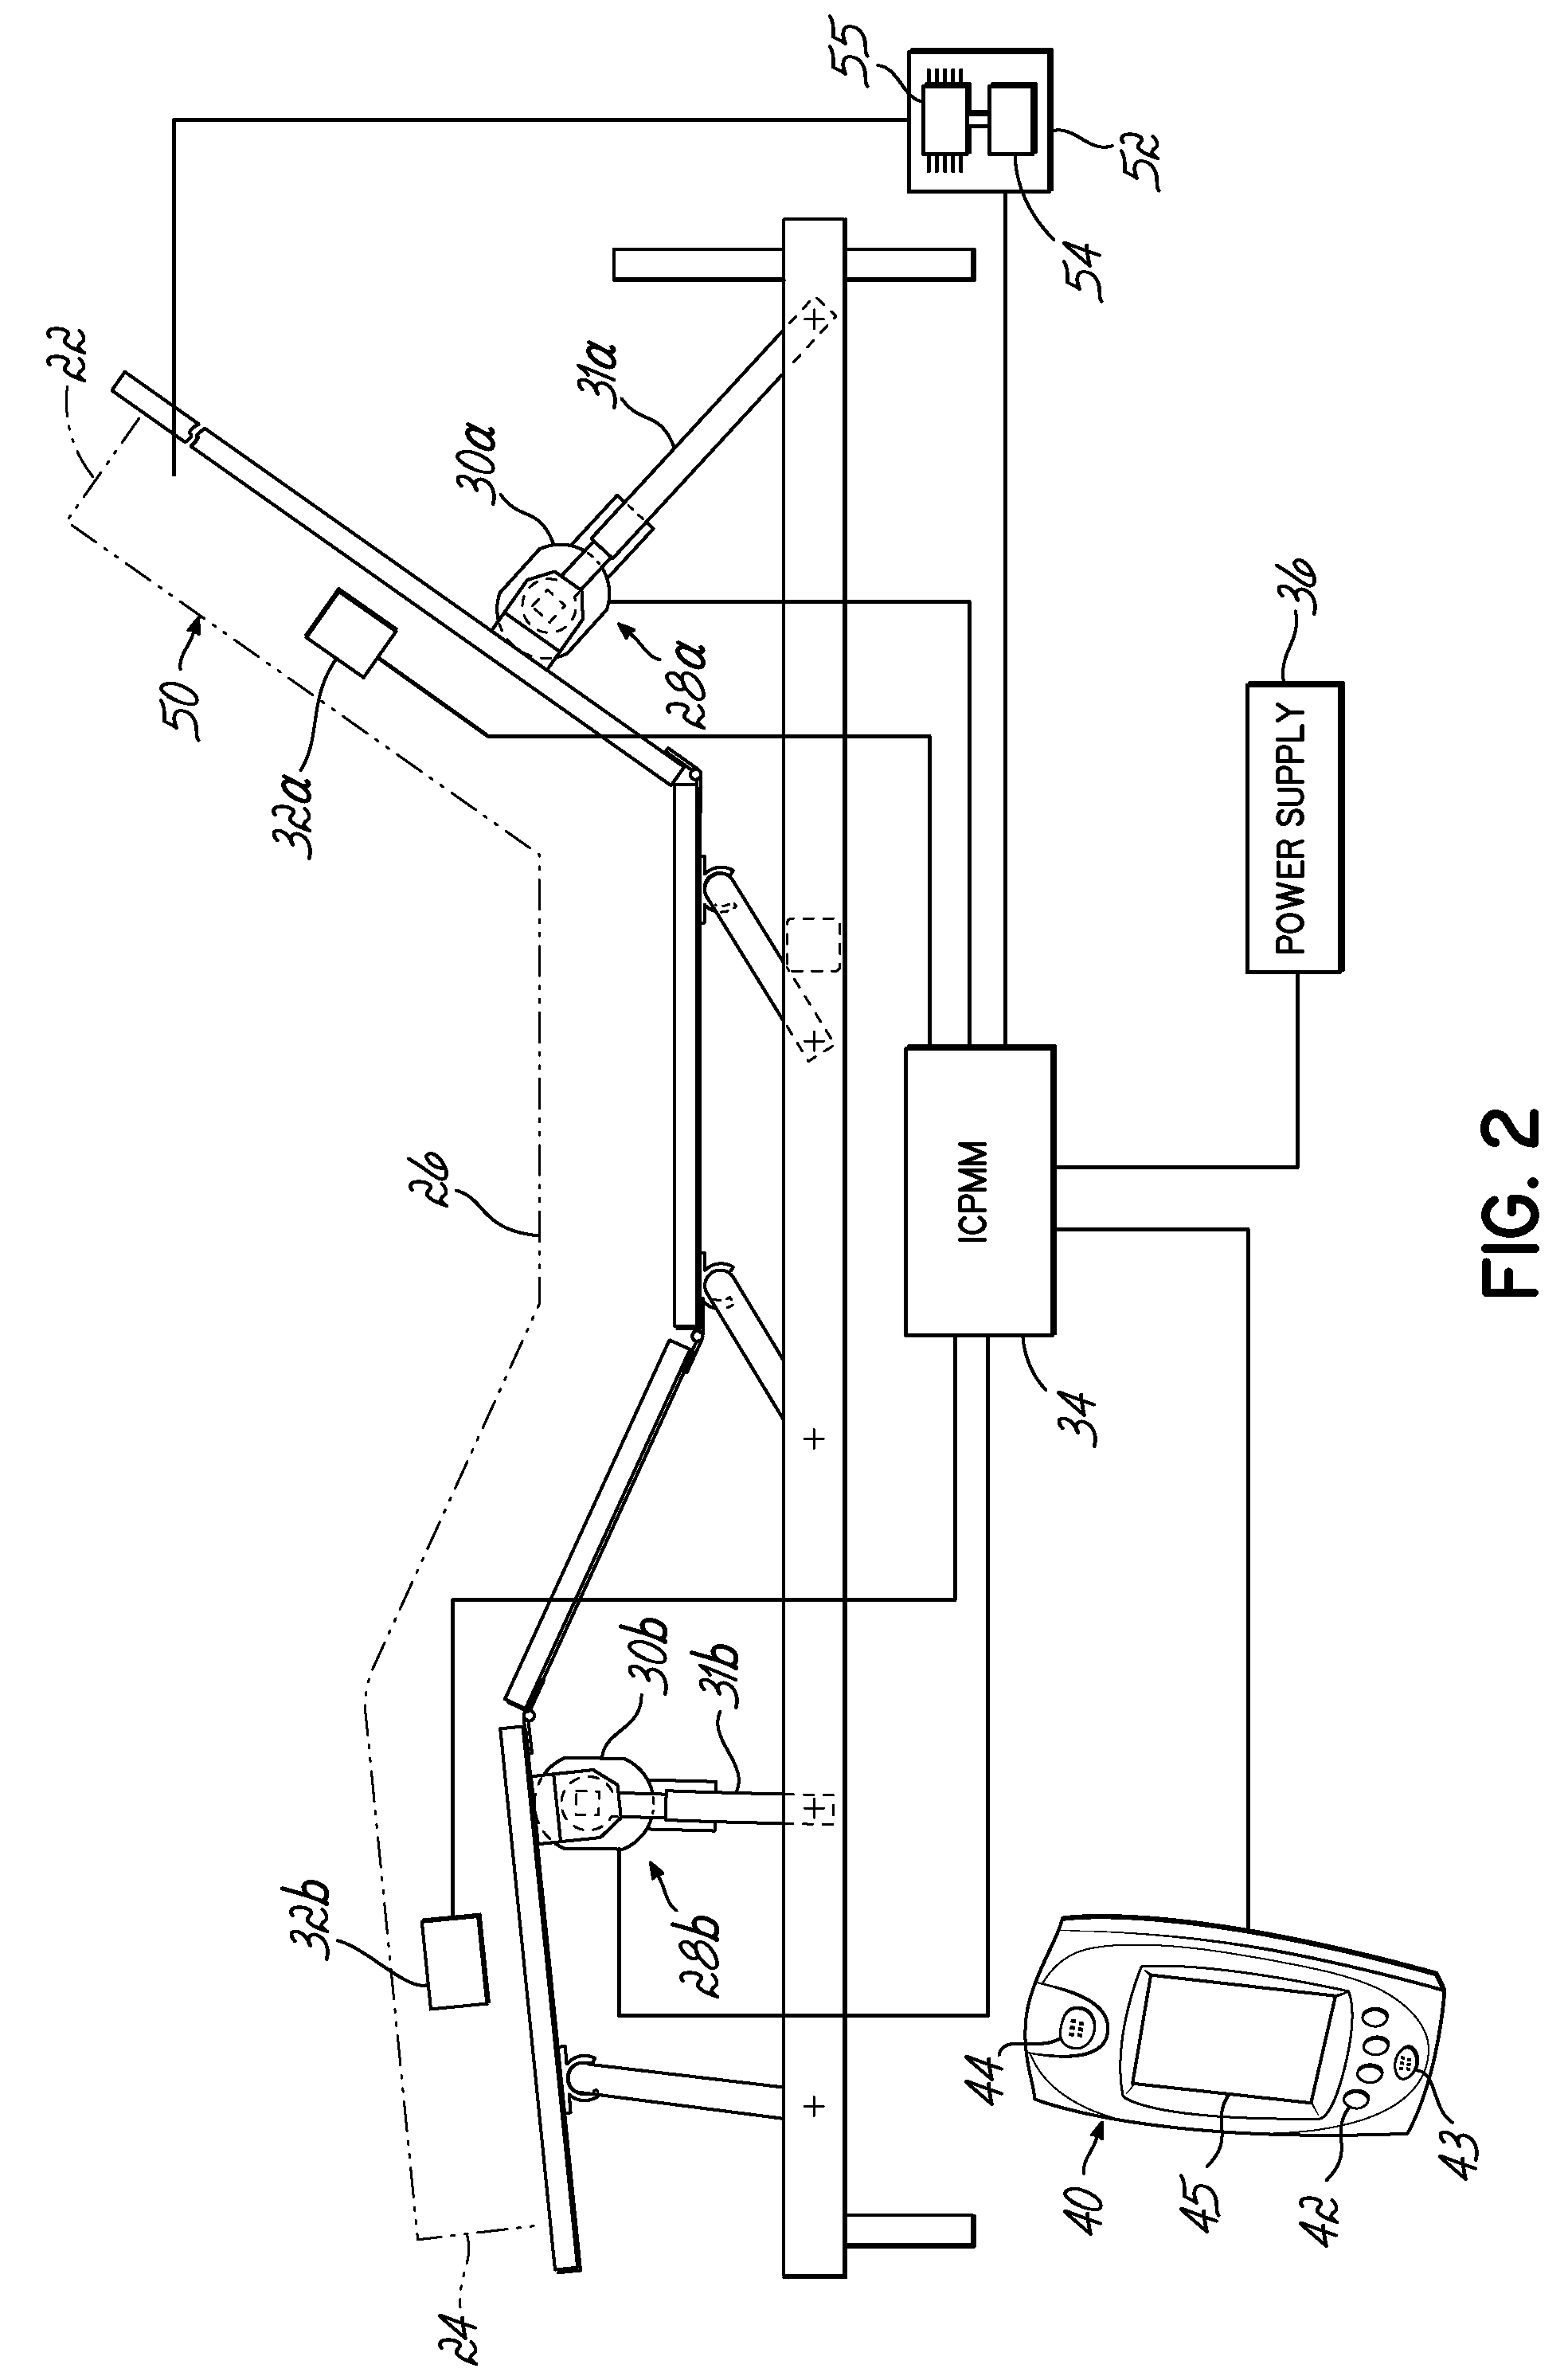 System and method for controlling adjustable furniture